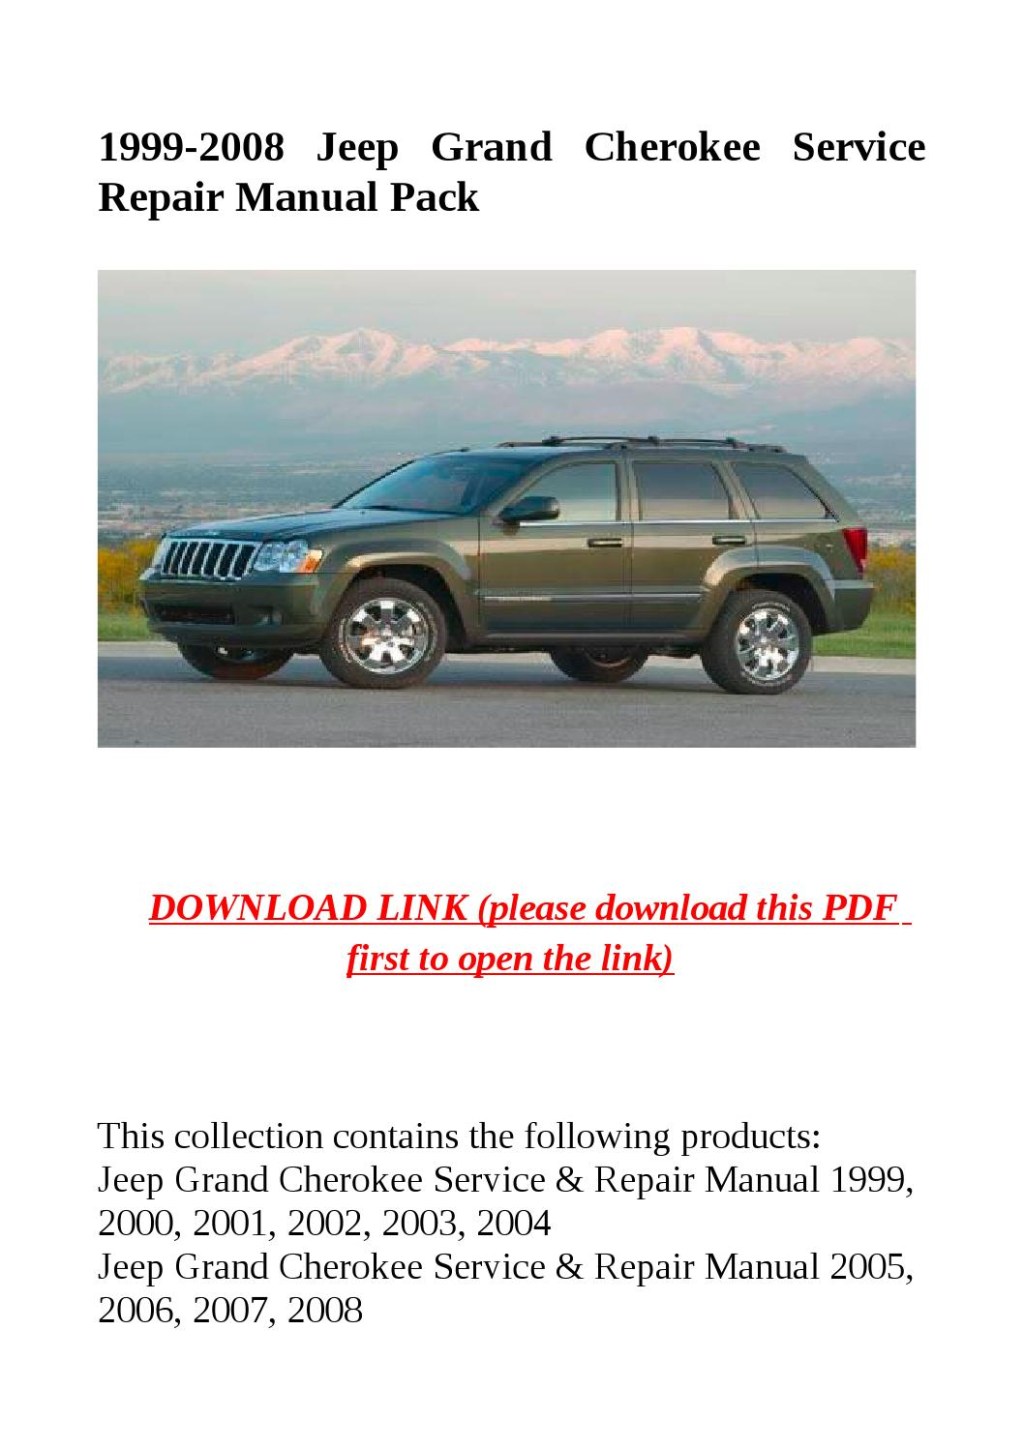 Picture of: jeep grand cherokee service repair manual pack by dale